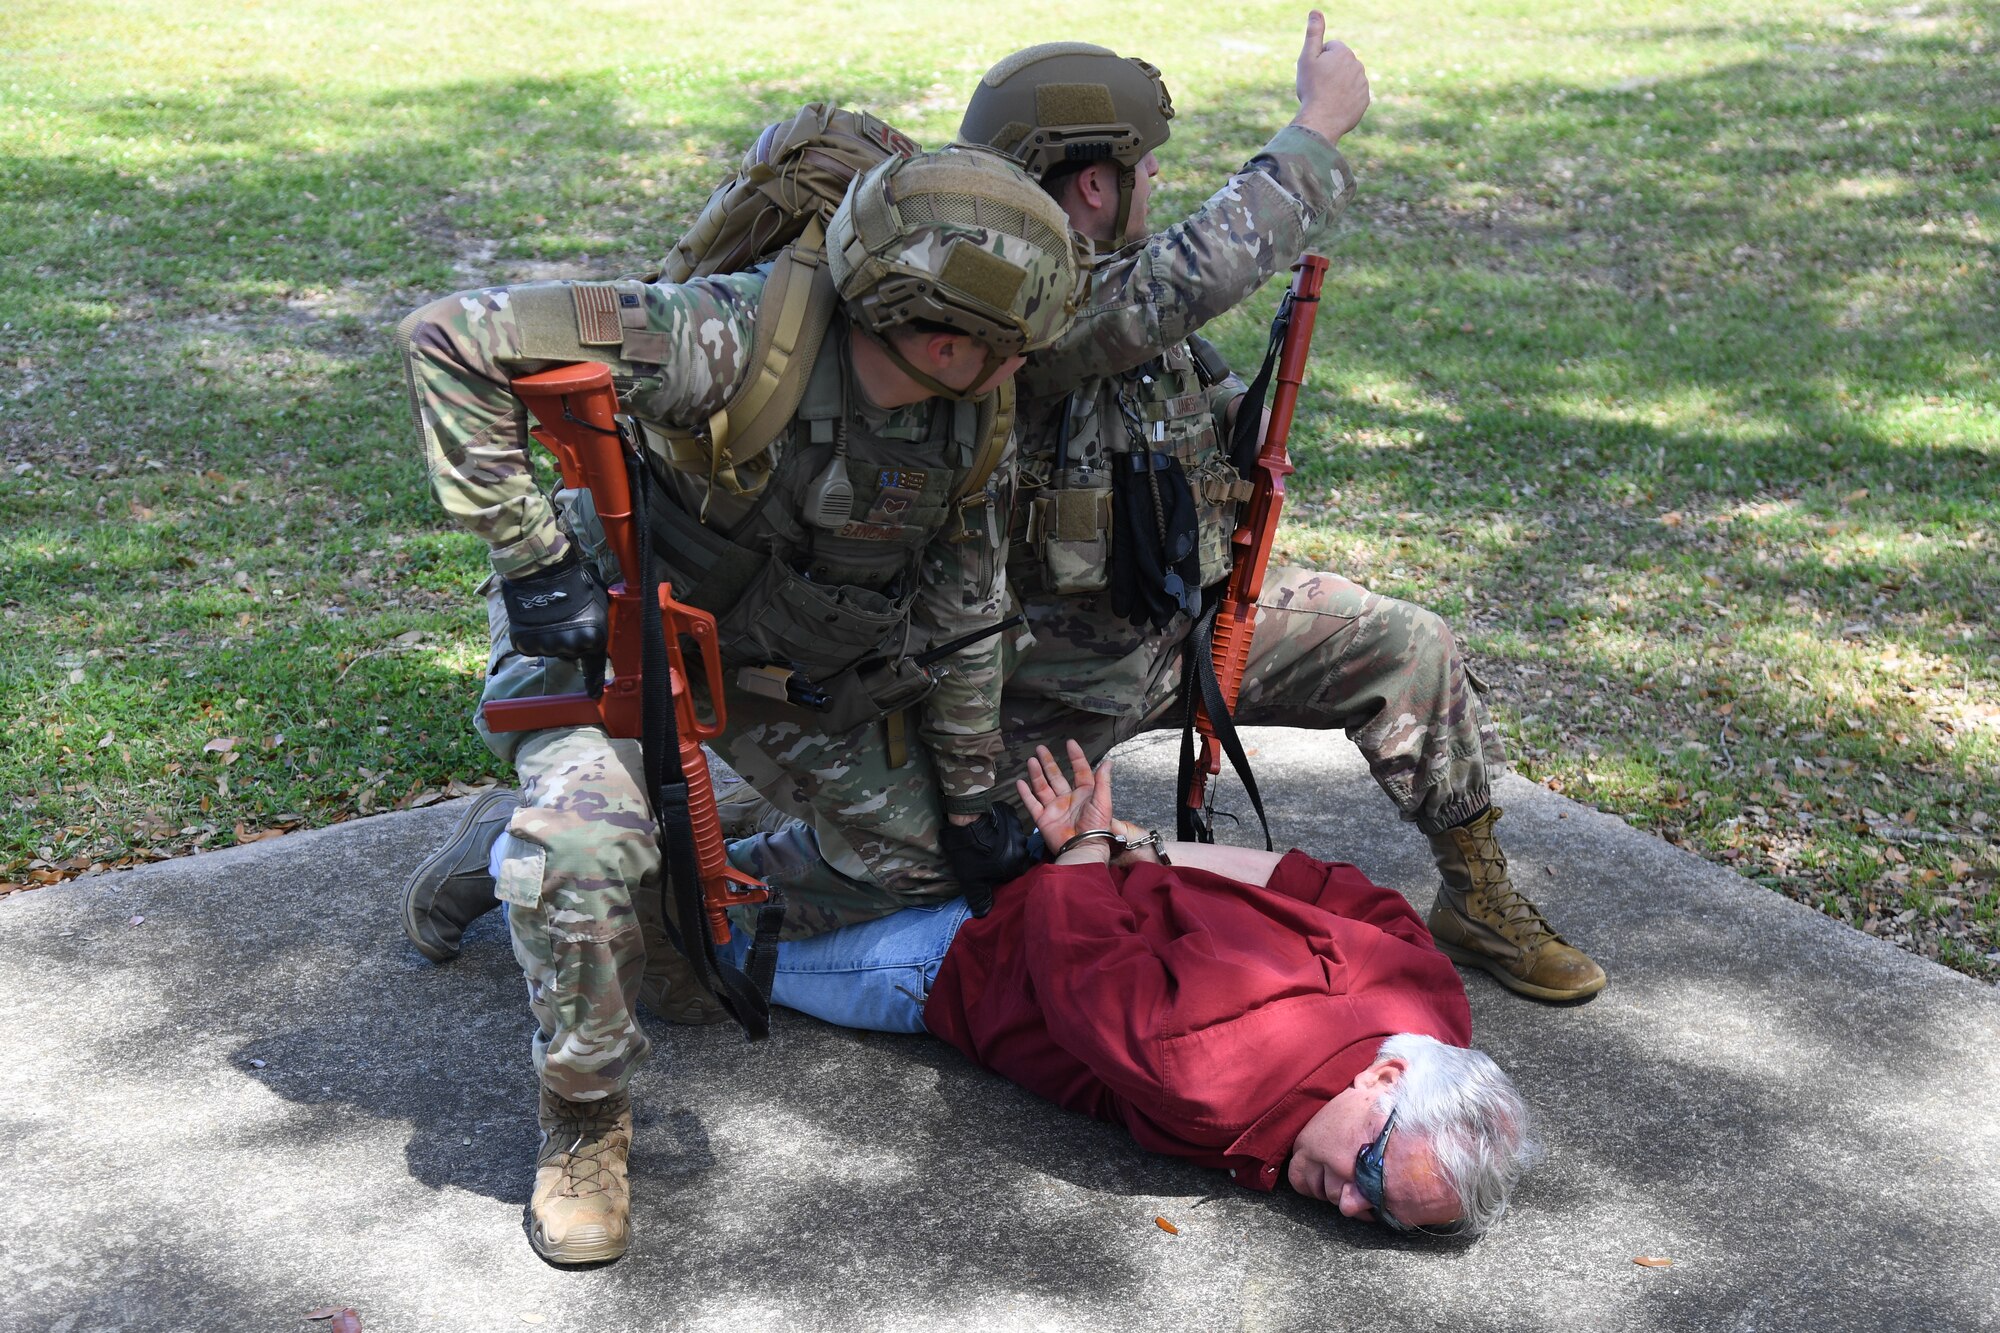 Members of the 81st Security Forces Squadron apprehend Mike Gulino, 81st Training Support Squadron director of training, as he portrays the perpetrator during an Antiterrorism, Force Protection and Chemical, Biological, Radiological, Nuclear exercise at Keesler Air Force Base, Mississippi, March 17, 2022. The exercise tested the base's ability to respond to and recover from a mass casualty event. (U.S. Air Force photo by Kemberly Groue)